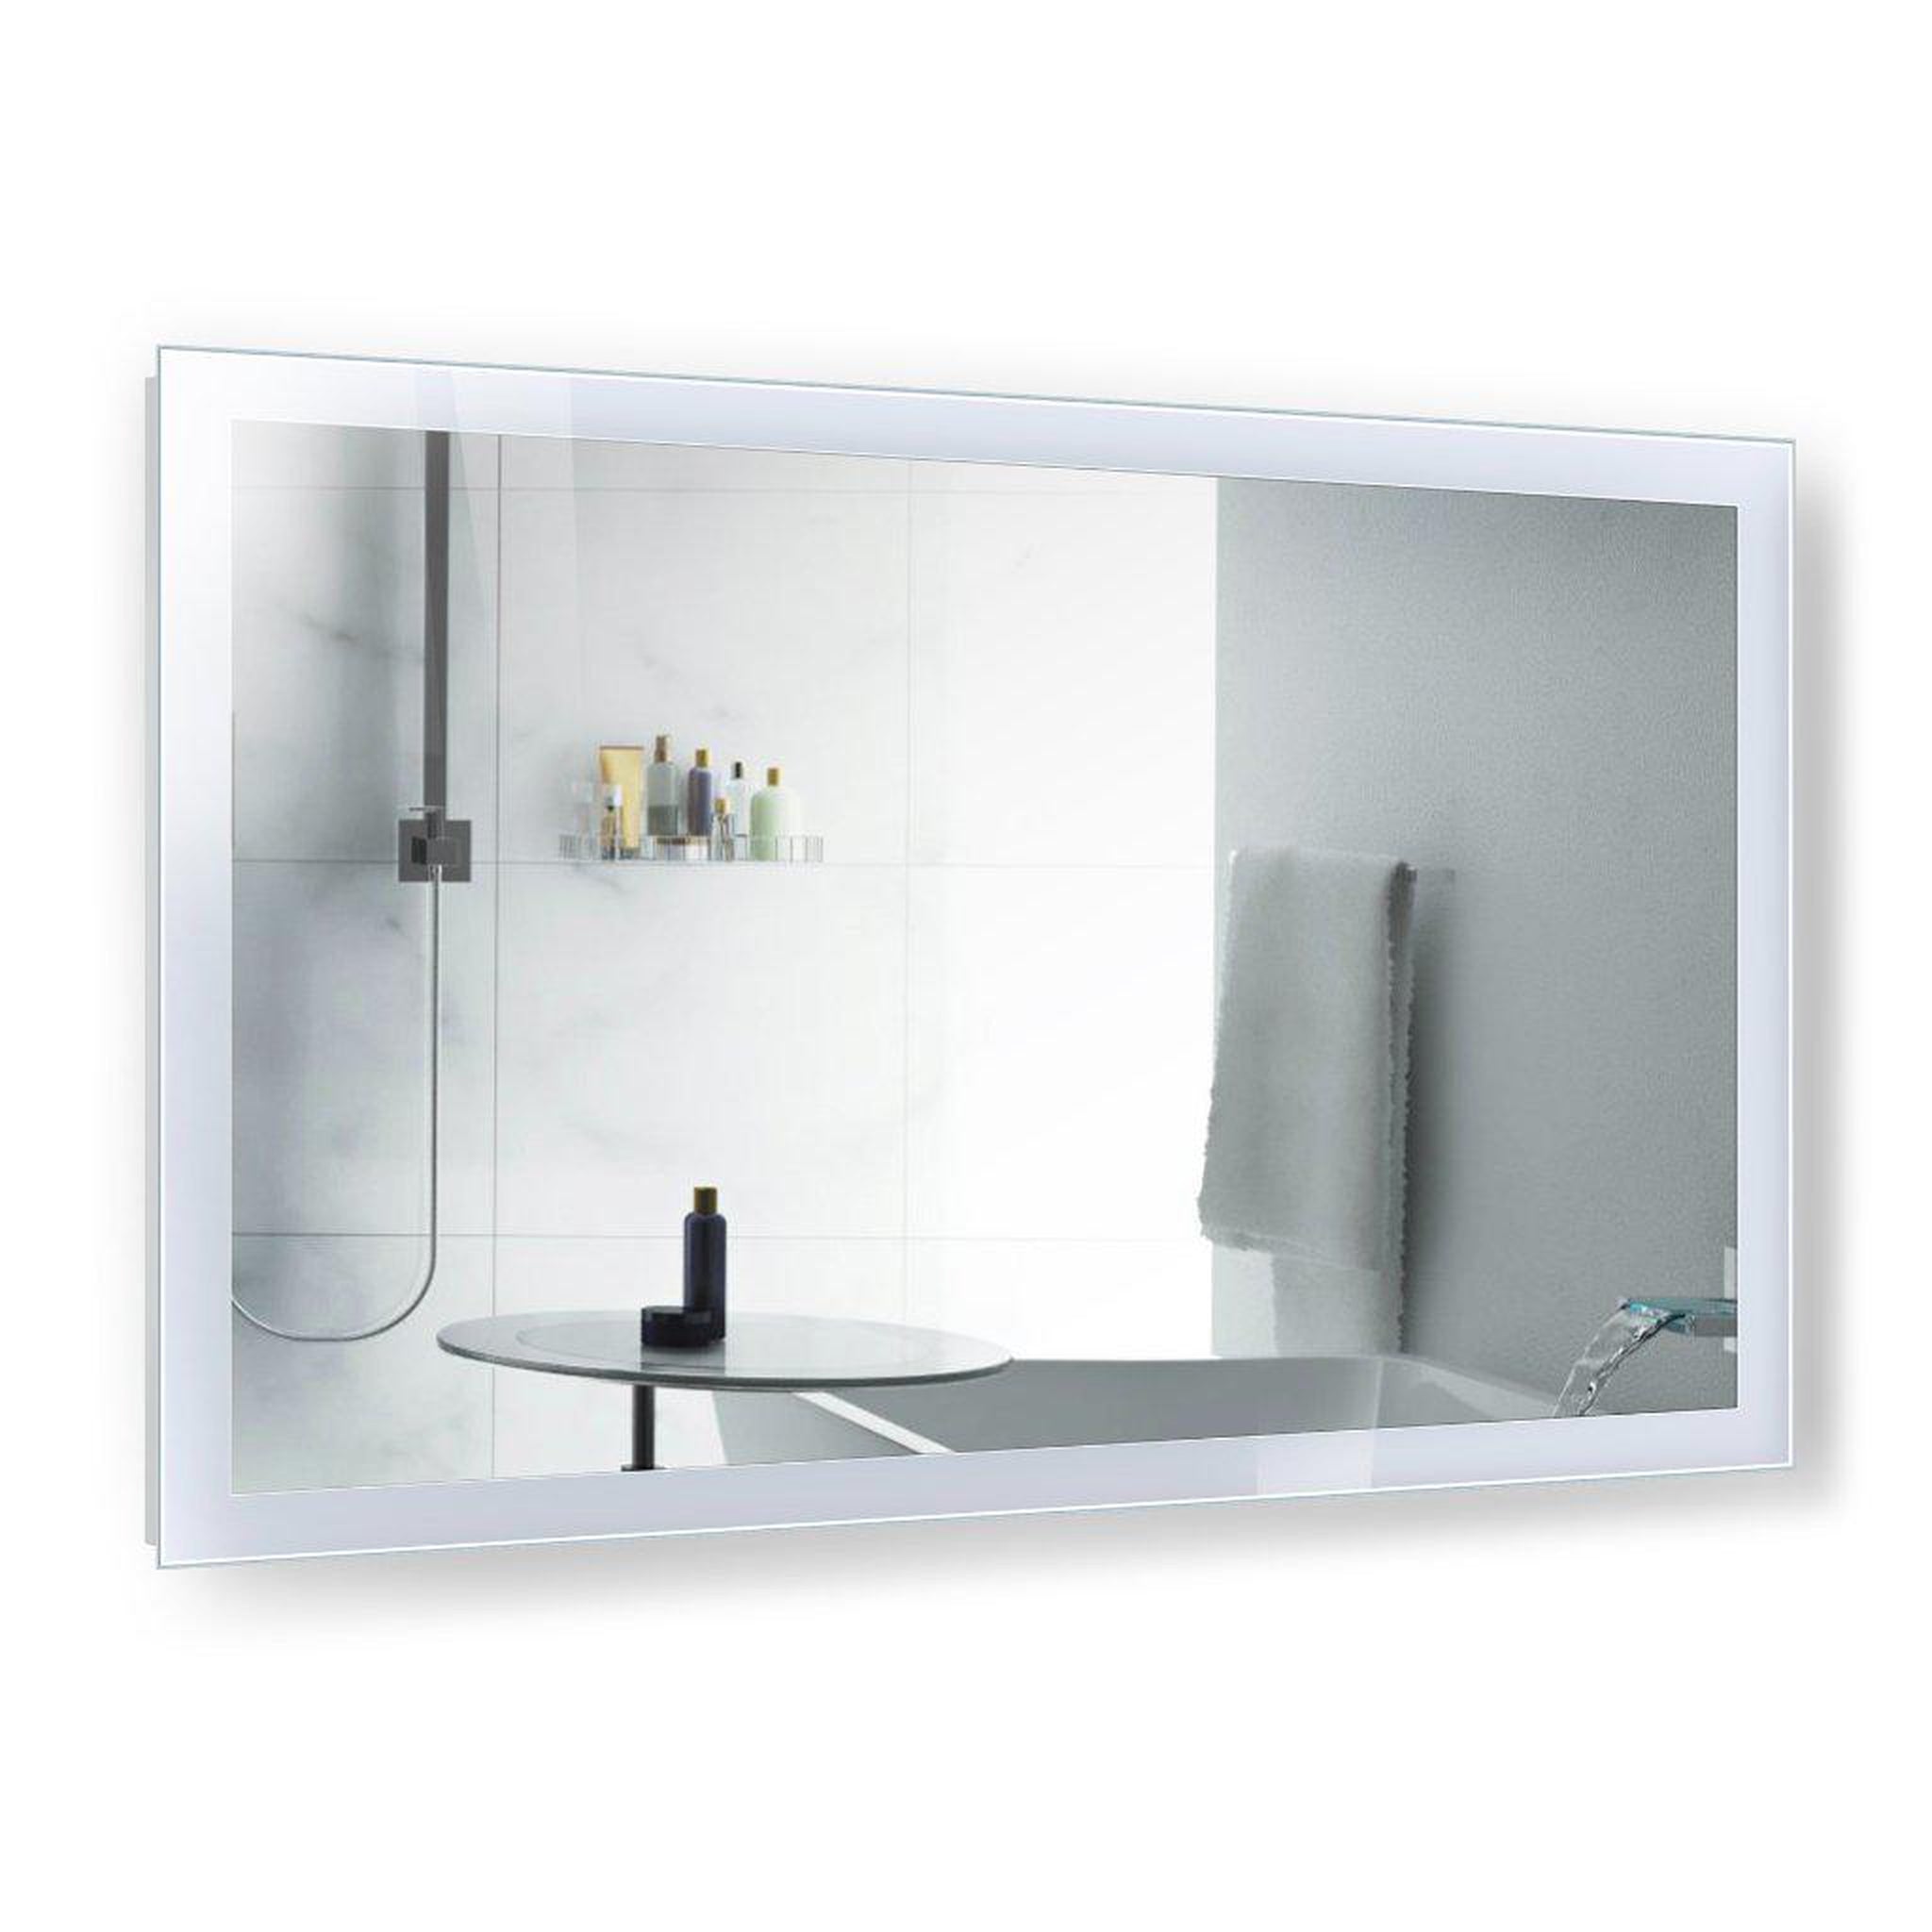 Krugg Reflections, Krugg Reflections Stella 60" x 36" 5000K Rectangular Wall-Mounted Silver-Backed LED Bathroom Vanity Mirror With Built-in Defogger and Dimmer